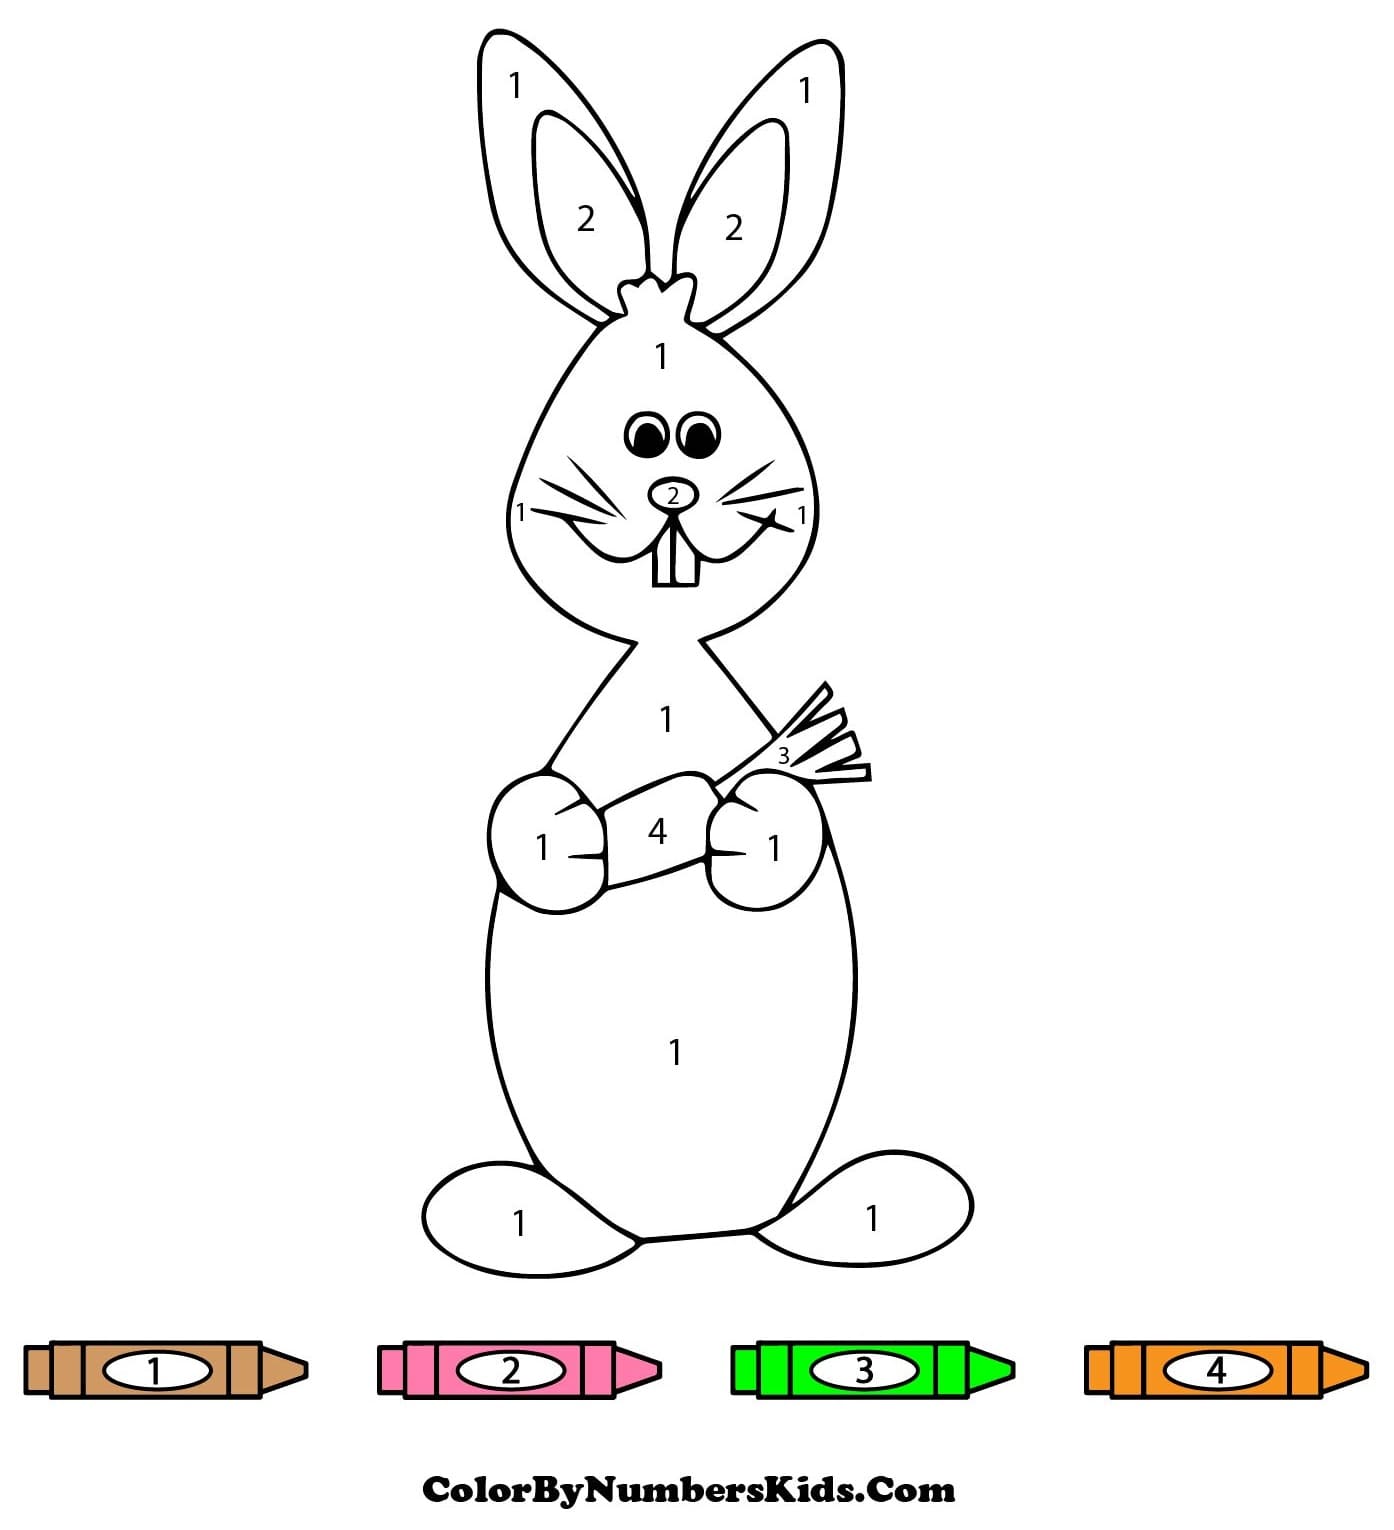 Rabbit and Carrot Color By Number